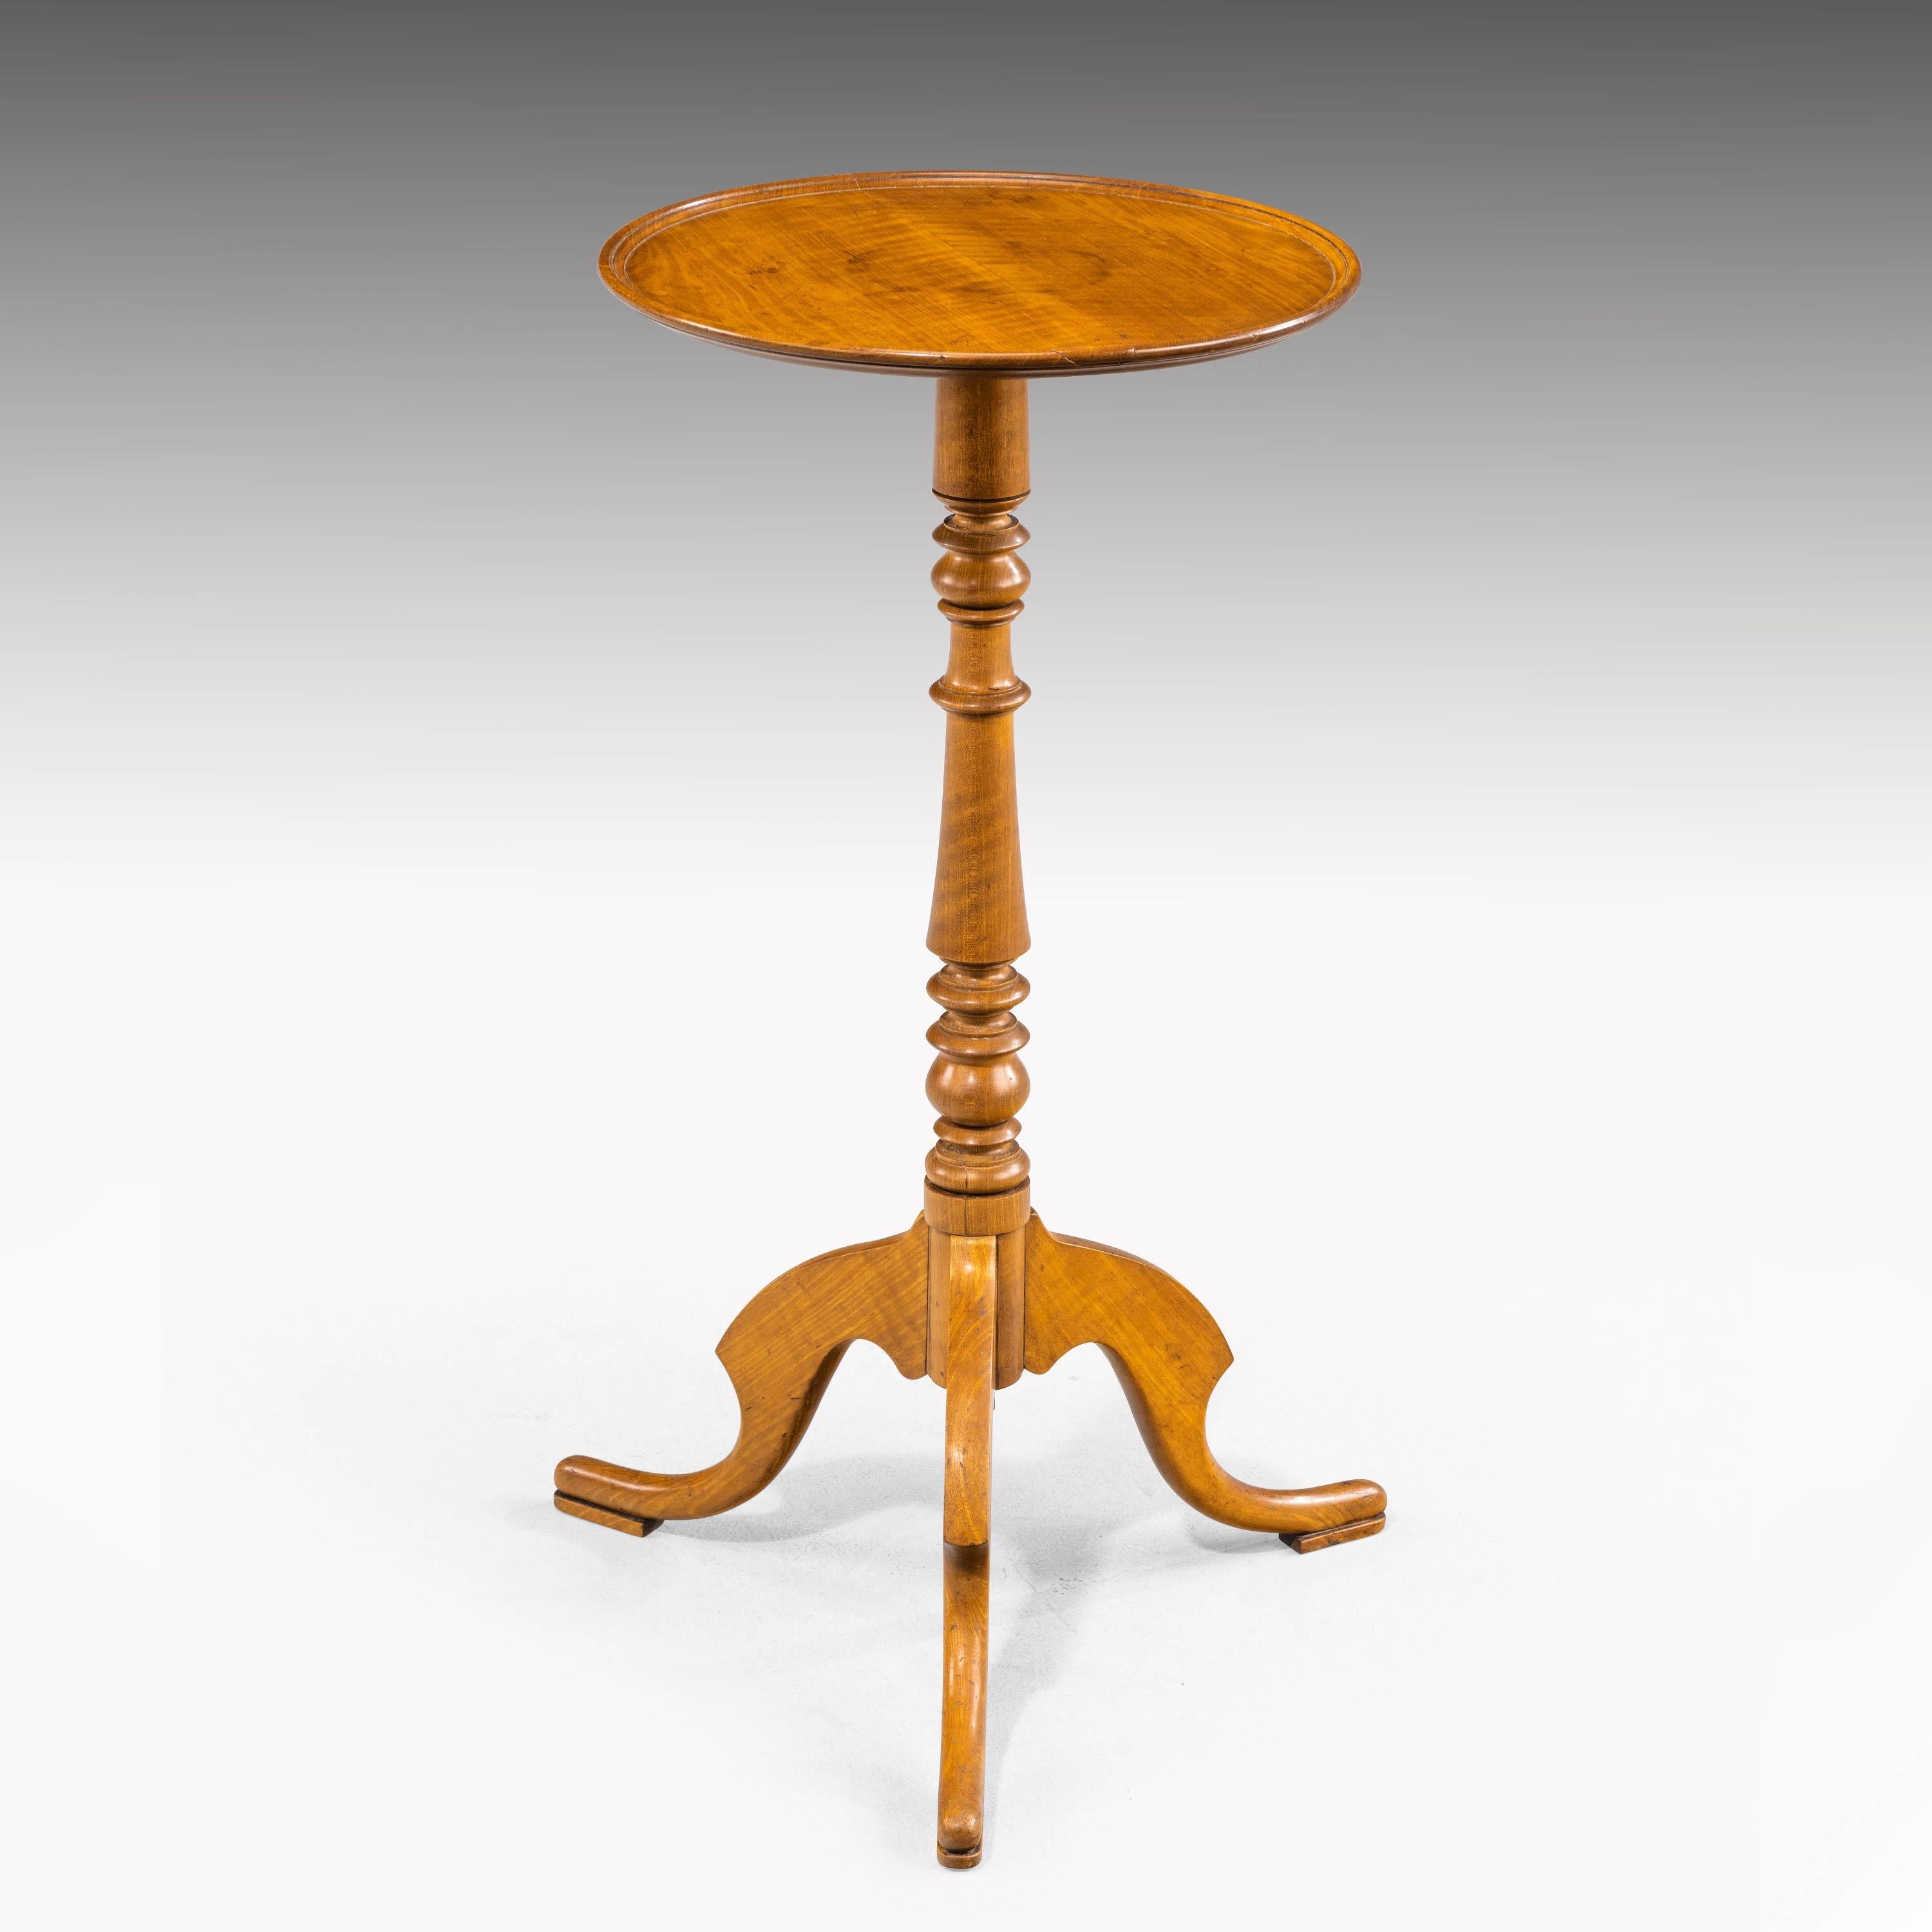 An elegant Regency period satinwood occasional wine table. On a finely turned central support. The top finished with very well figured timbers.
            